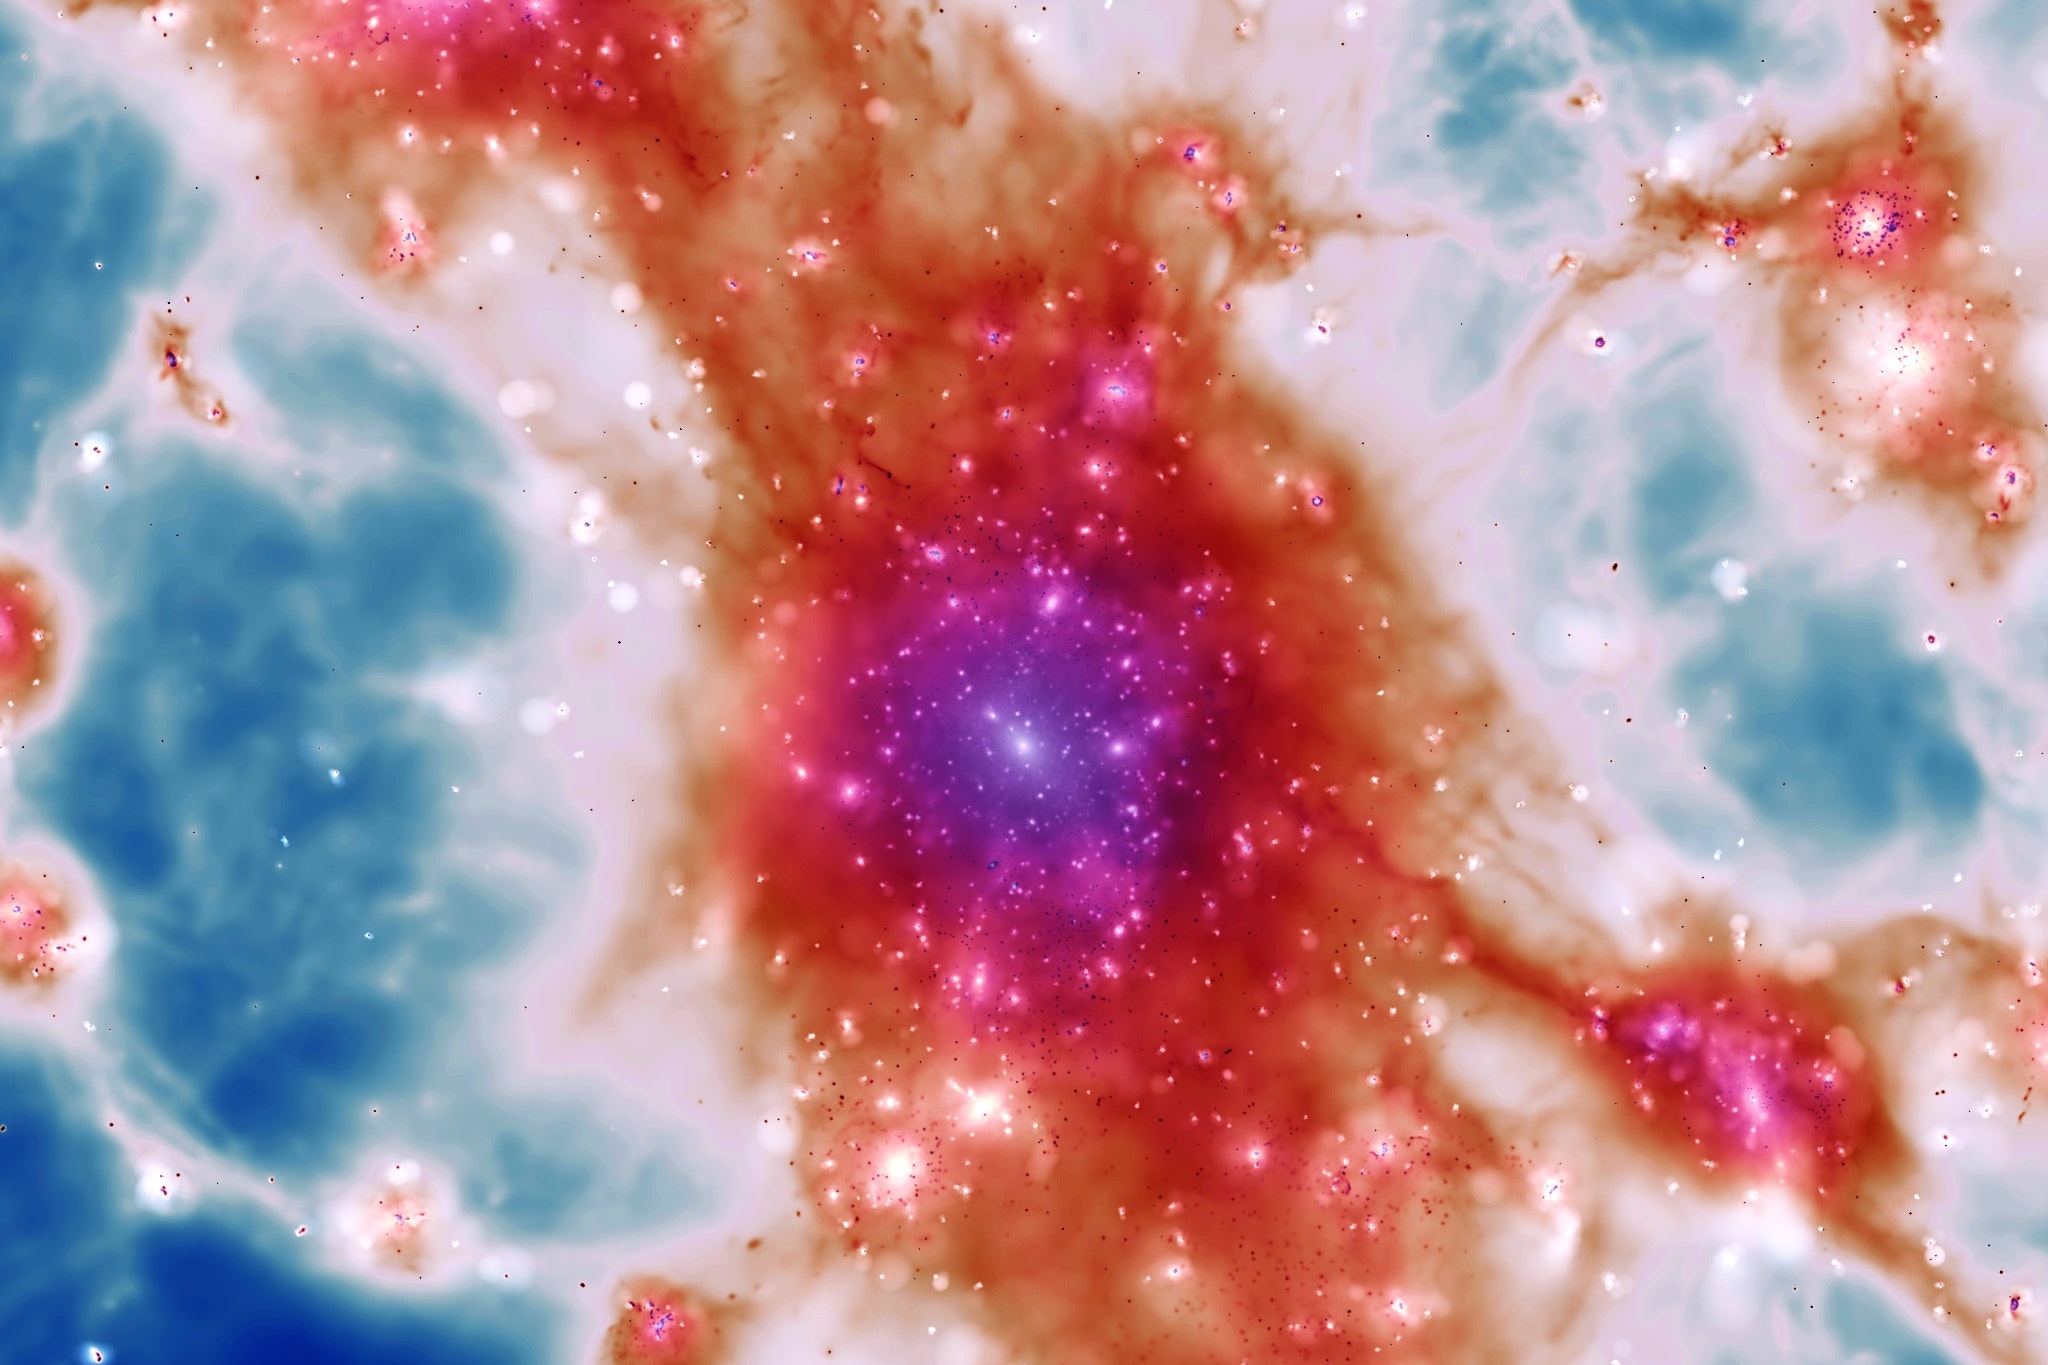 Glowing gas reveals faint filaments of cosmic web | Ardrossan and Saltcoats Herald